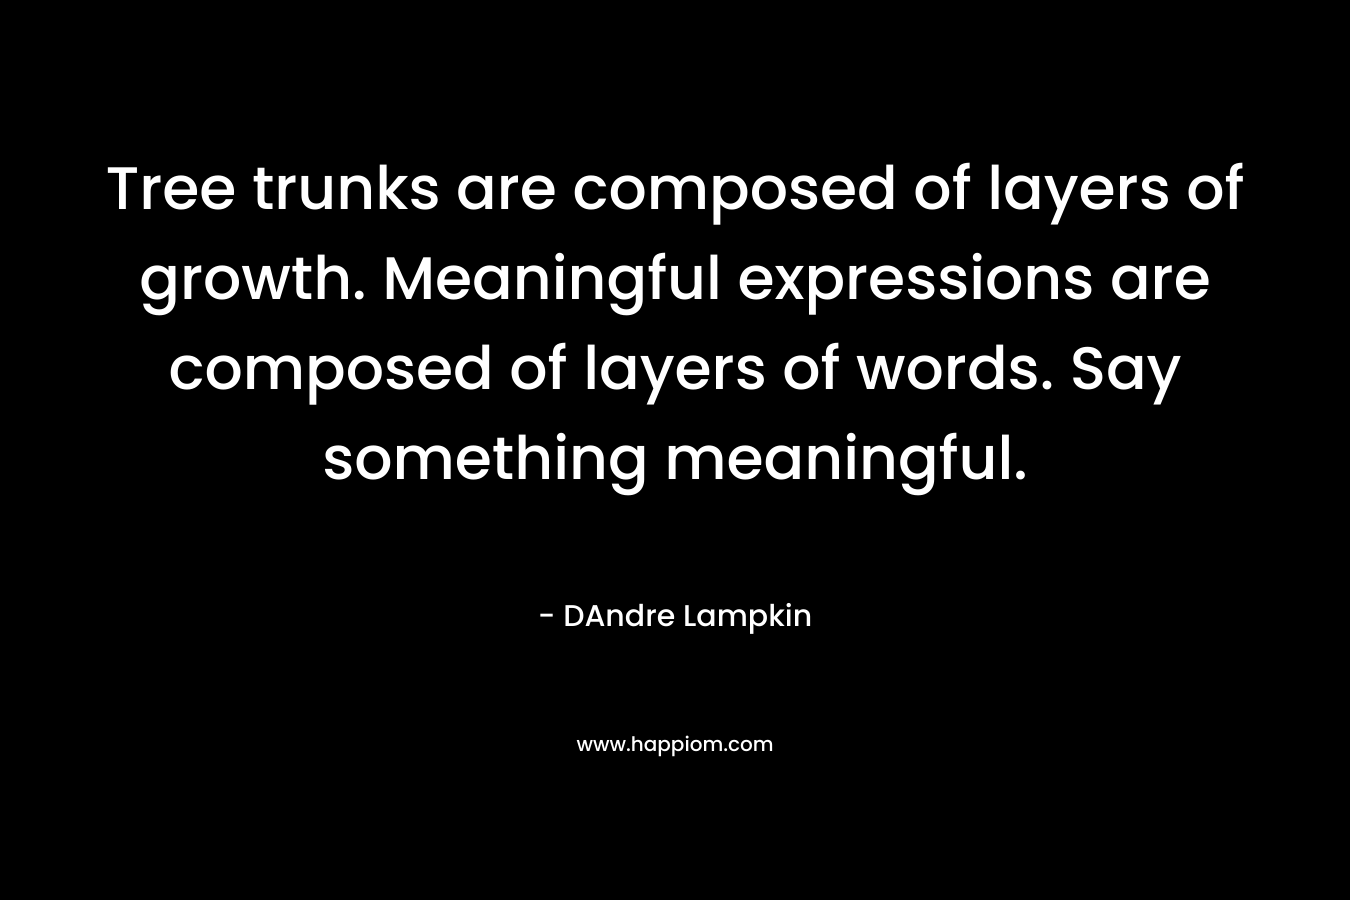 Tree trunks are composed of layers of growth. Meaningful expressions are composed of layers of words. Say something meaningful. – DAndre Lampkin